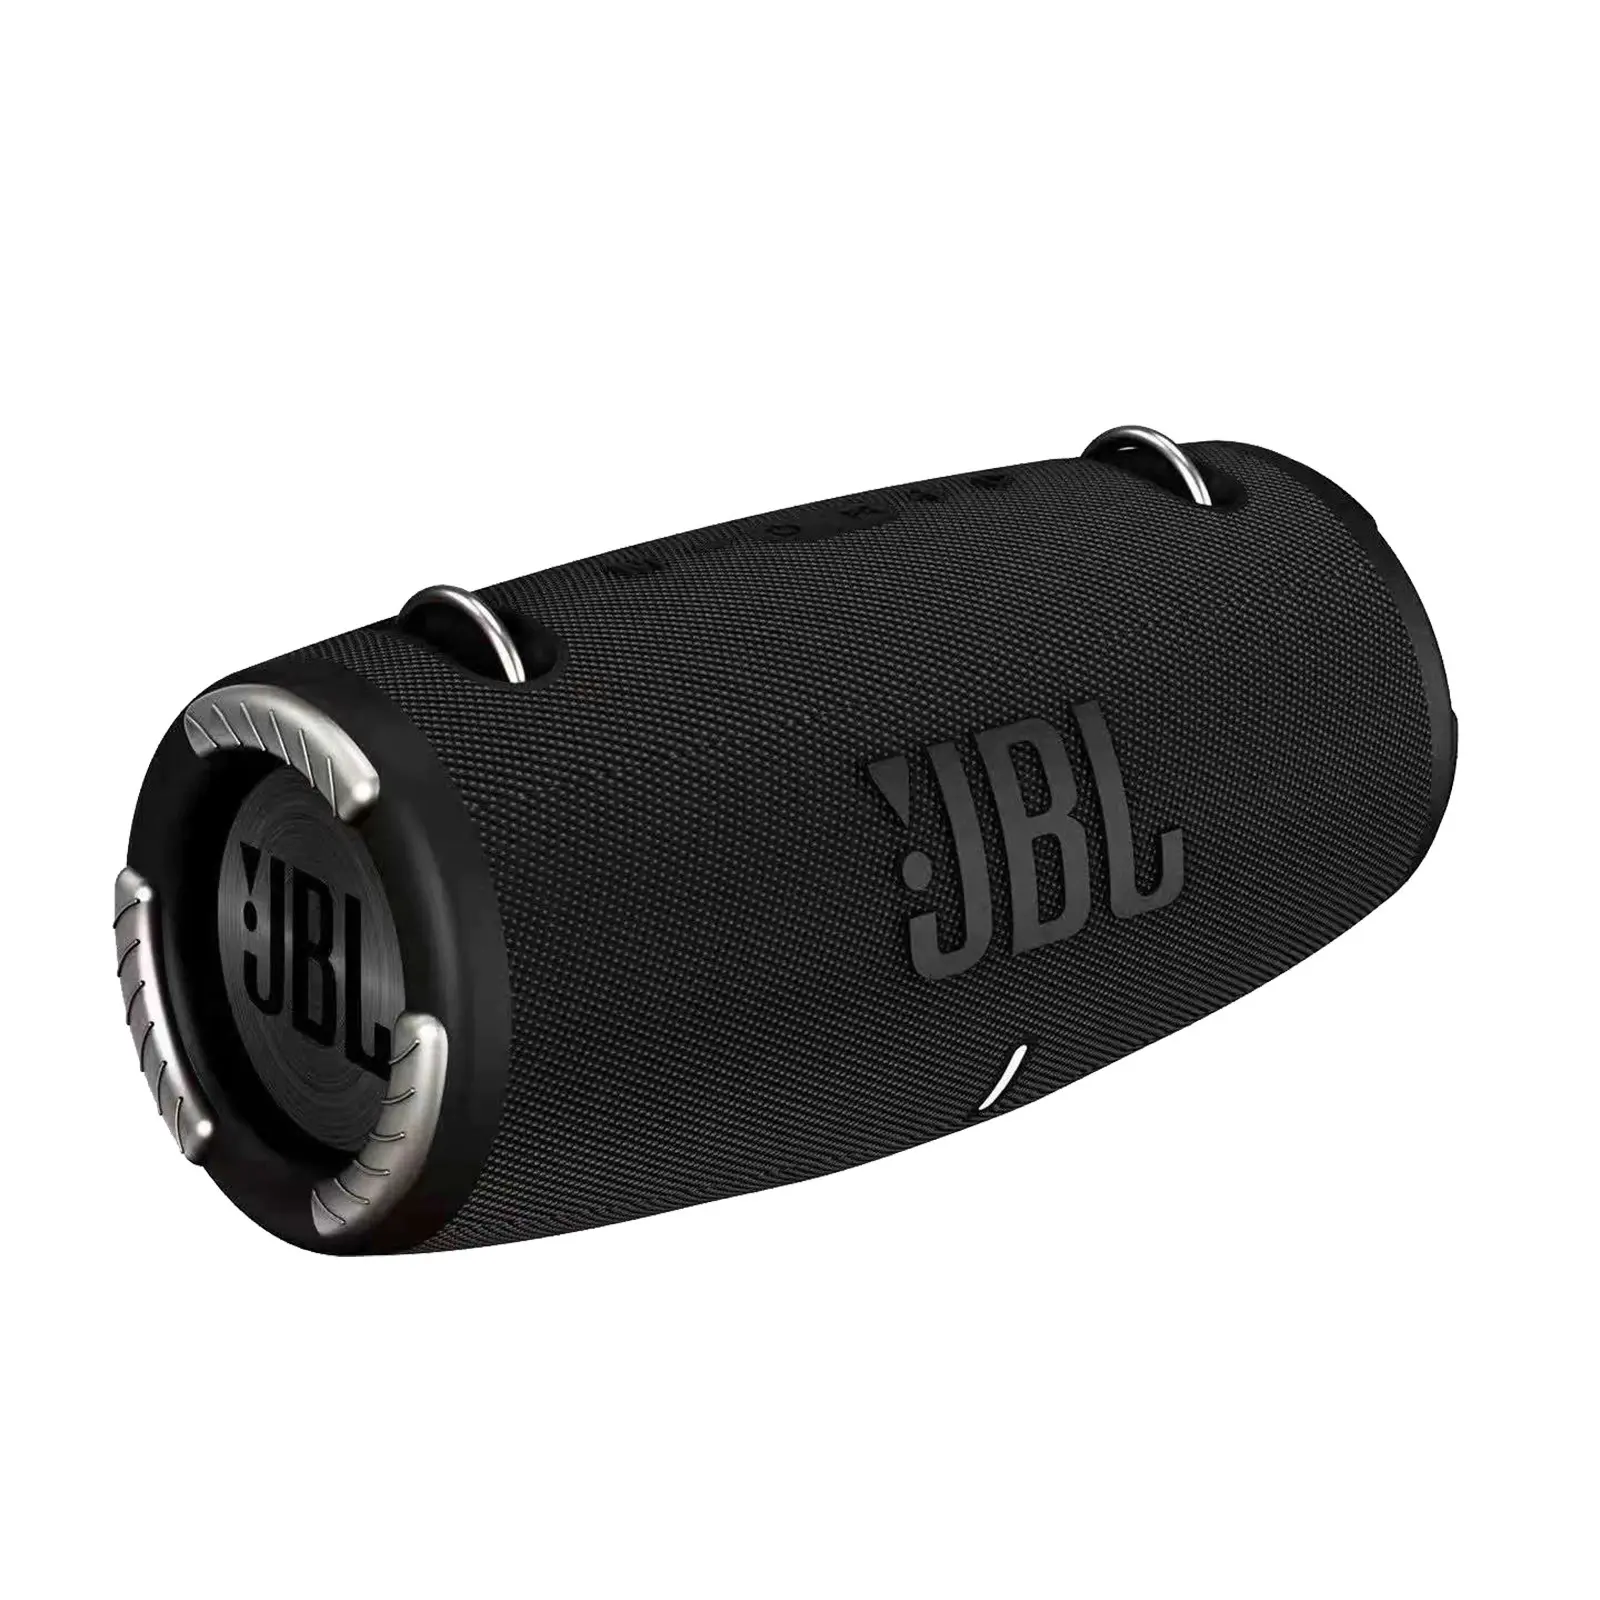 Jbl Xtreme 3 Speaker Blue-tooth Subwoofer Wireless Jbl Speaker BT Speakers Xtreme3 Portable Boombox Charge